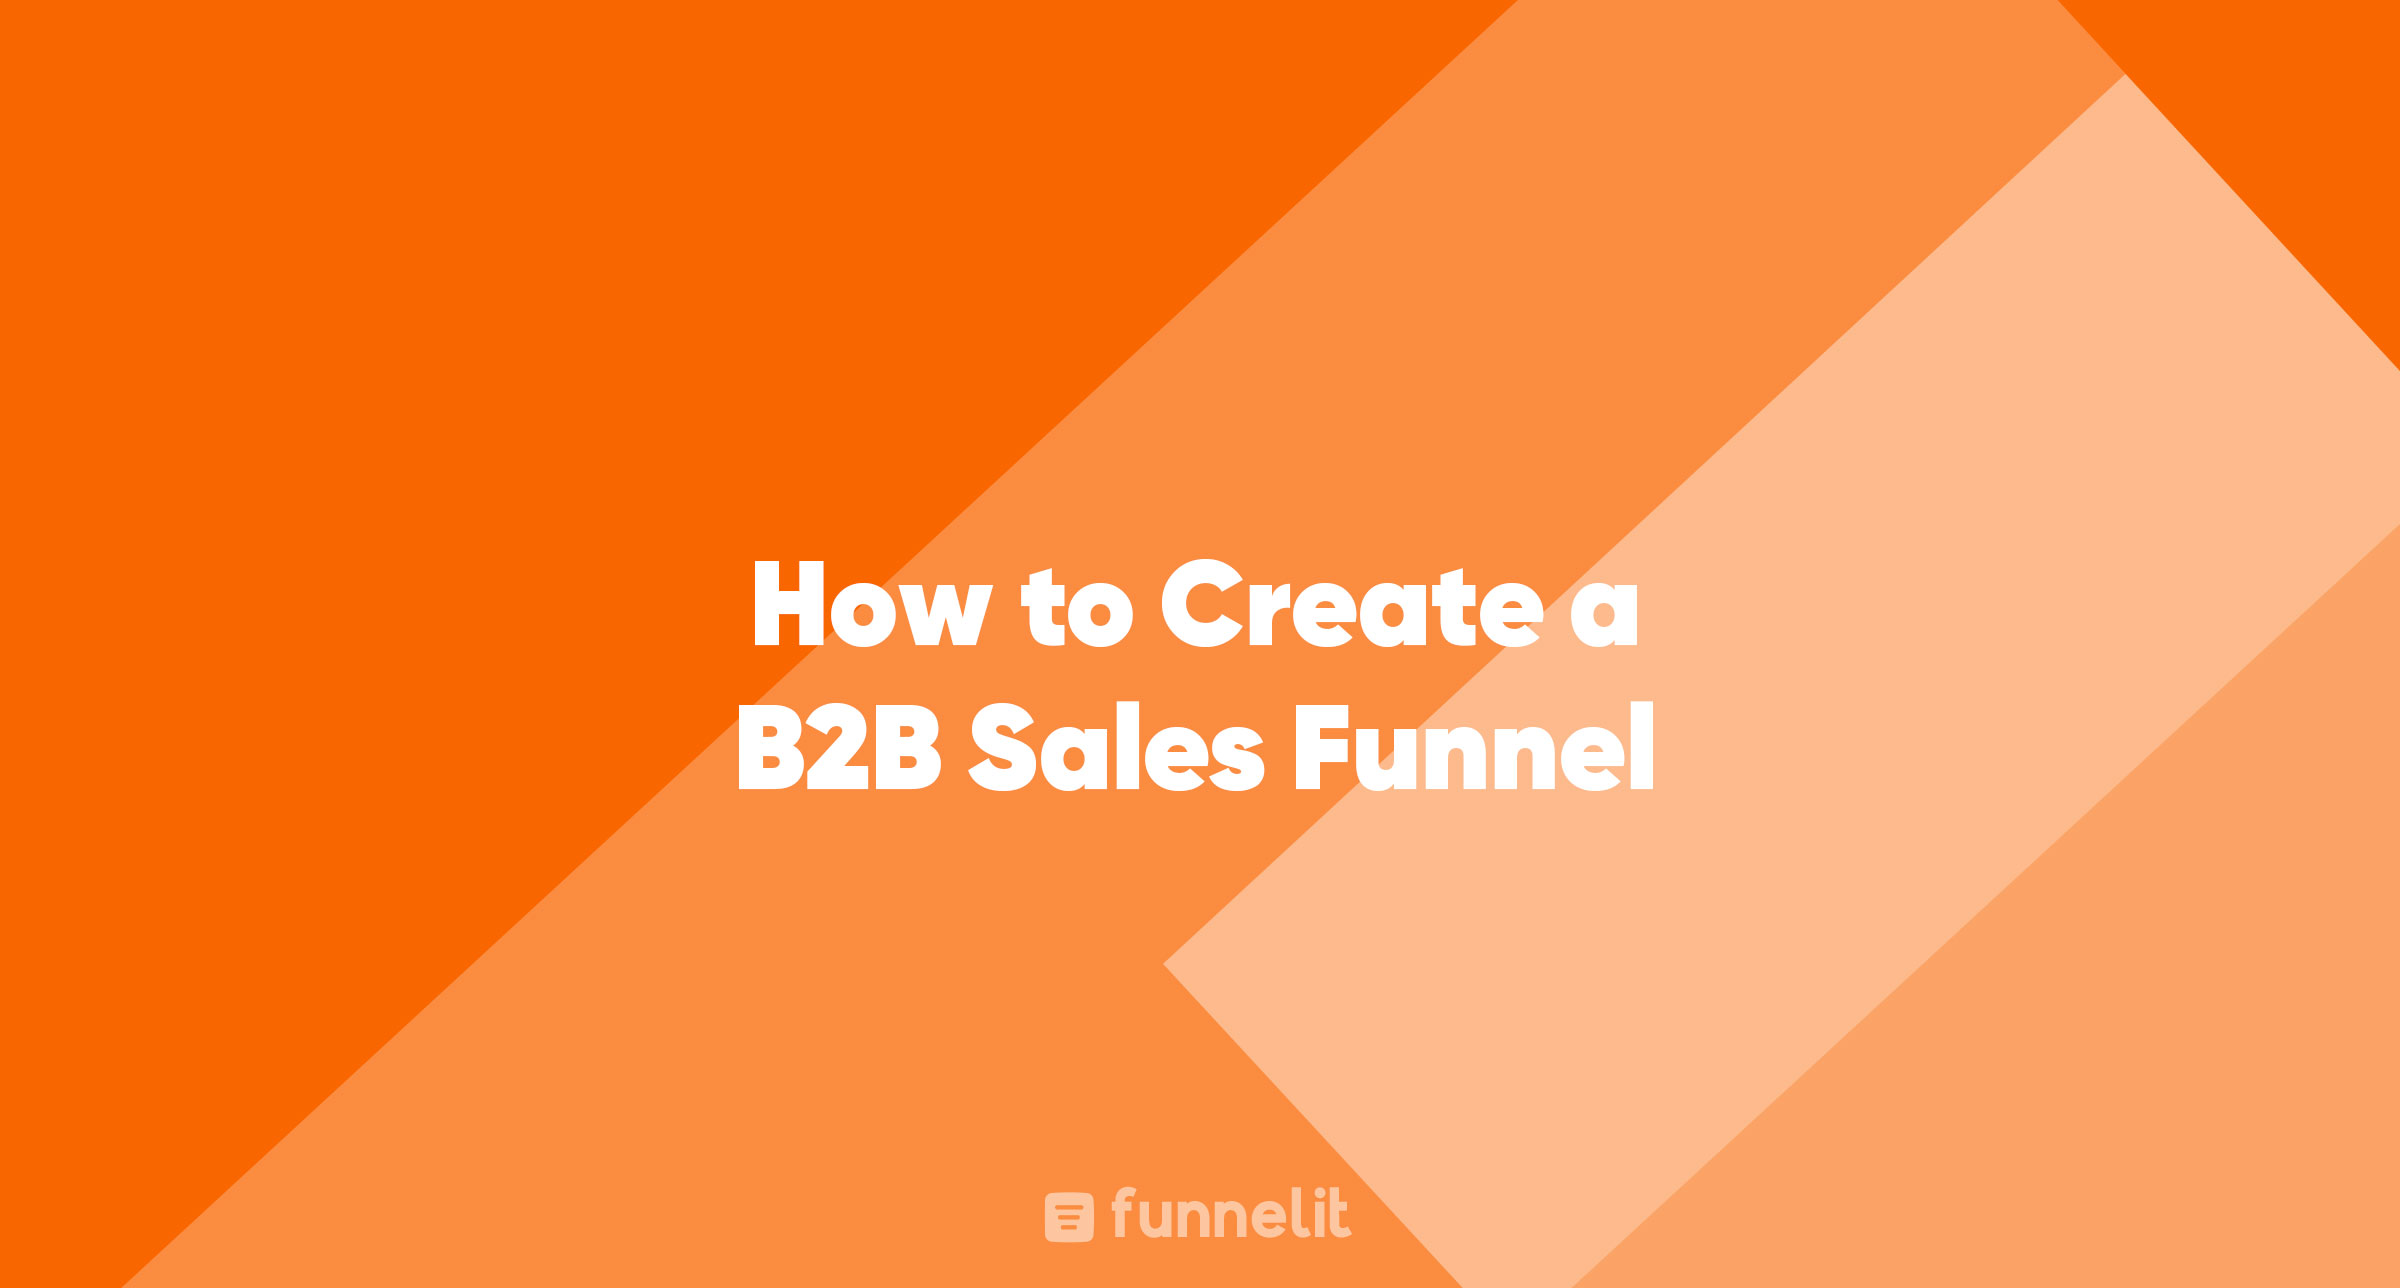 Article | How to Create a B2B Sales Funnel